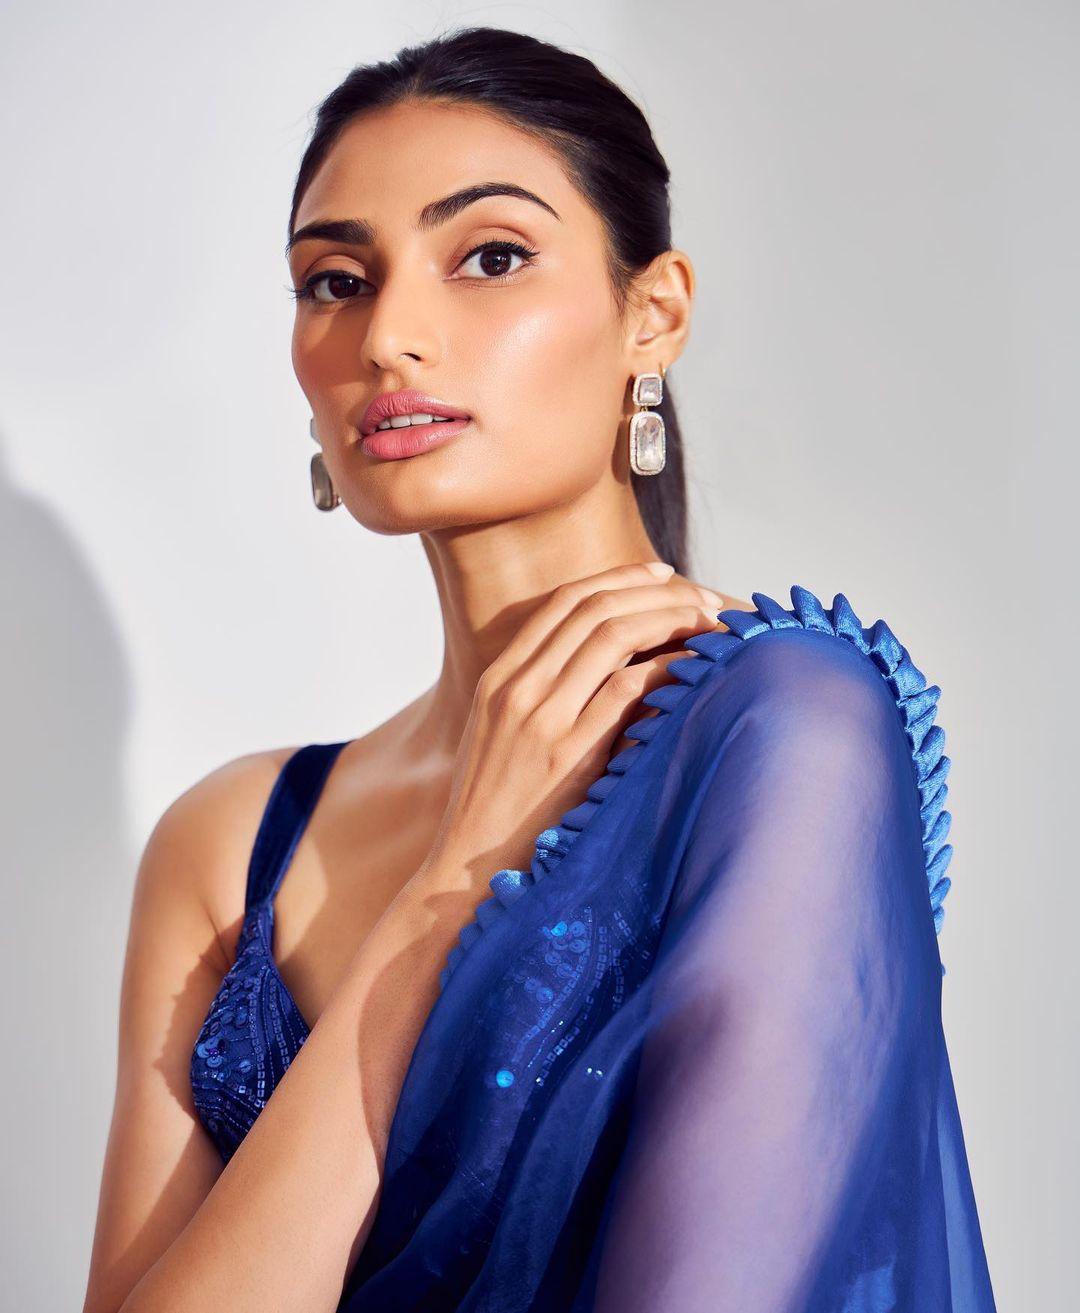 Athiya Shetty rocked a beautiful electric blue drape by Manish Malhotra, and everyone couldn't stop talking about it for all the right reasons.